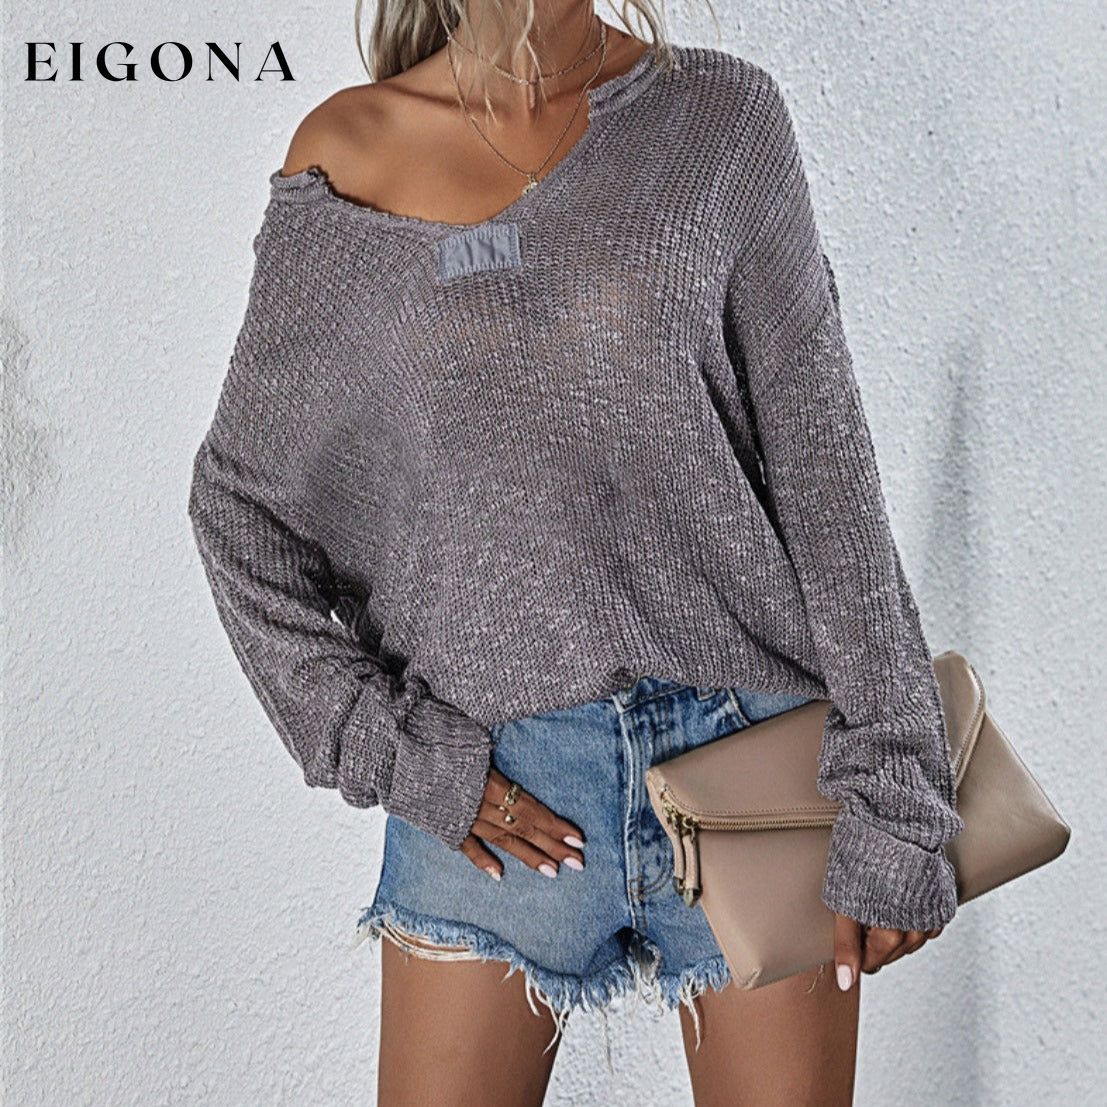 Notched Neck Slit Knit Top Heather Gray clothes J&Q long sleeve shirt long sleeve shirts long sleeve top long sleeve tops Ship From Overseas Shipping Delay 09/29/2023 - 10/04/2023 shirt shirts top tops